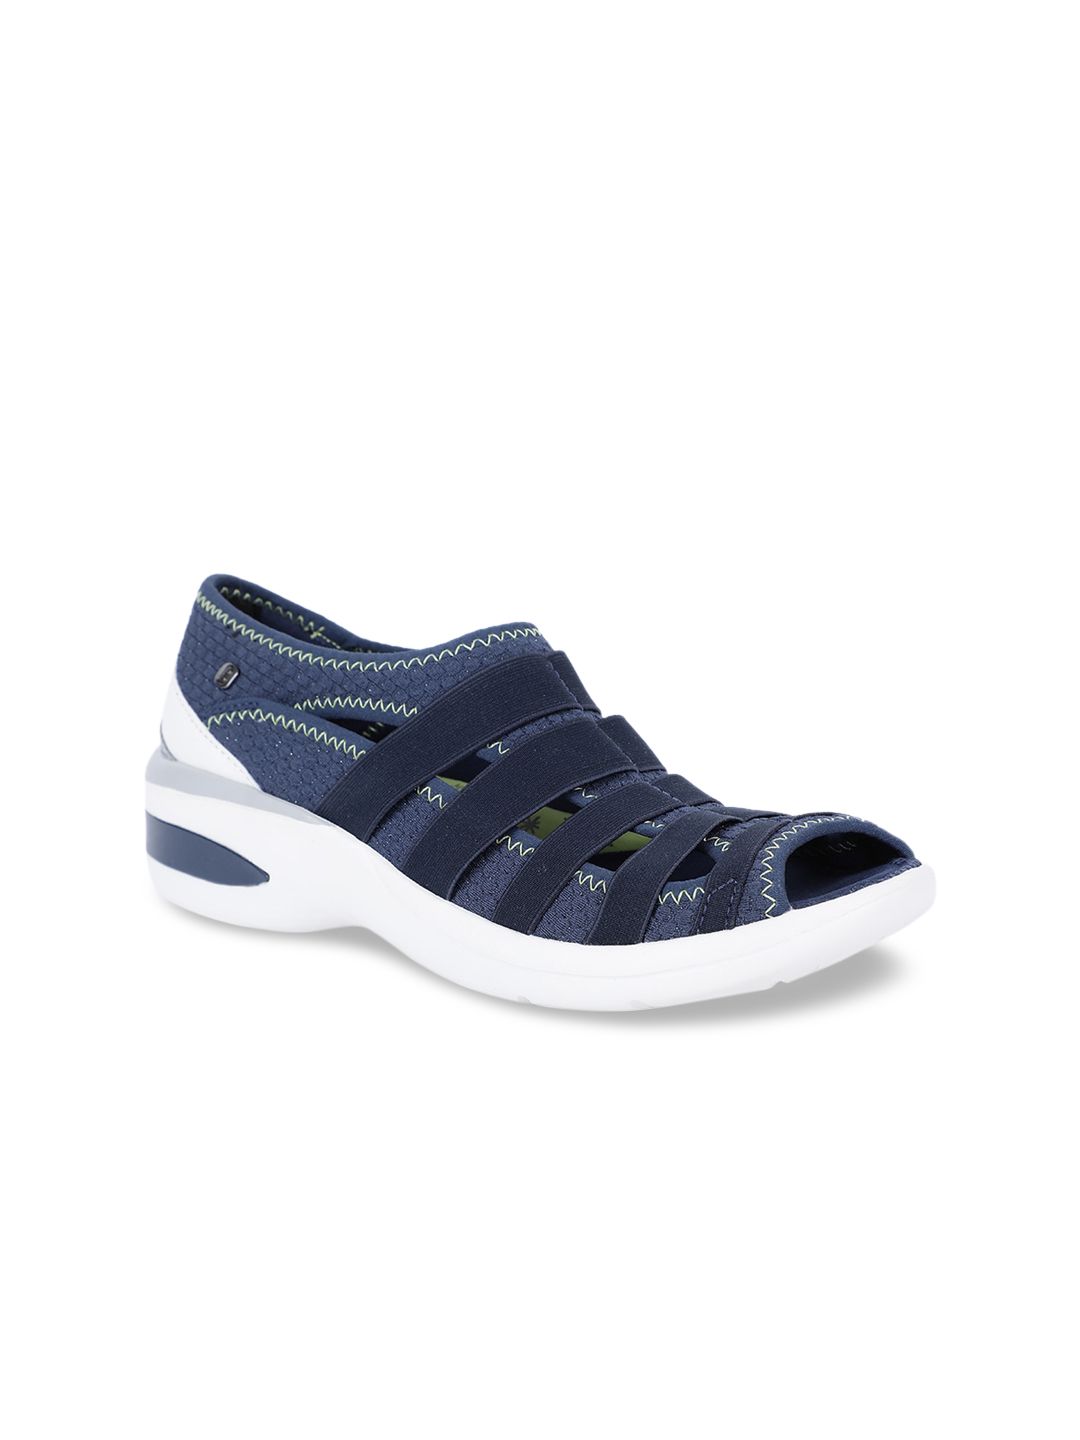 Naturalizer Women Blue Slip-On Sneakers Price in India